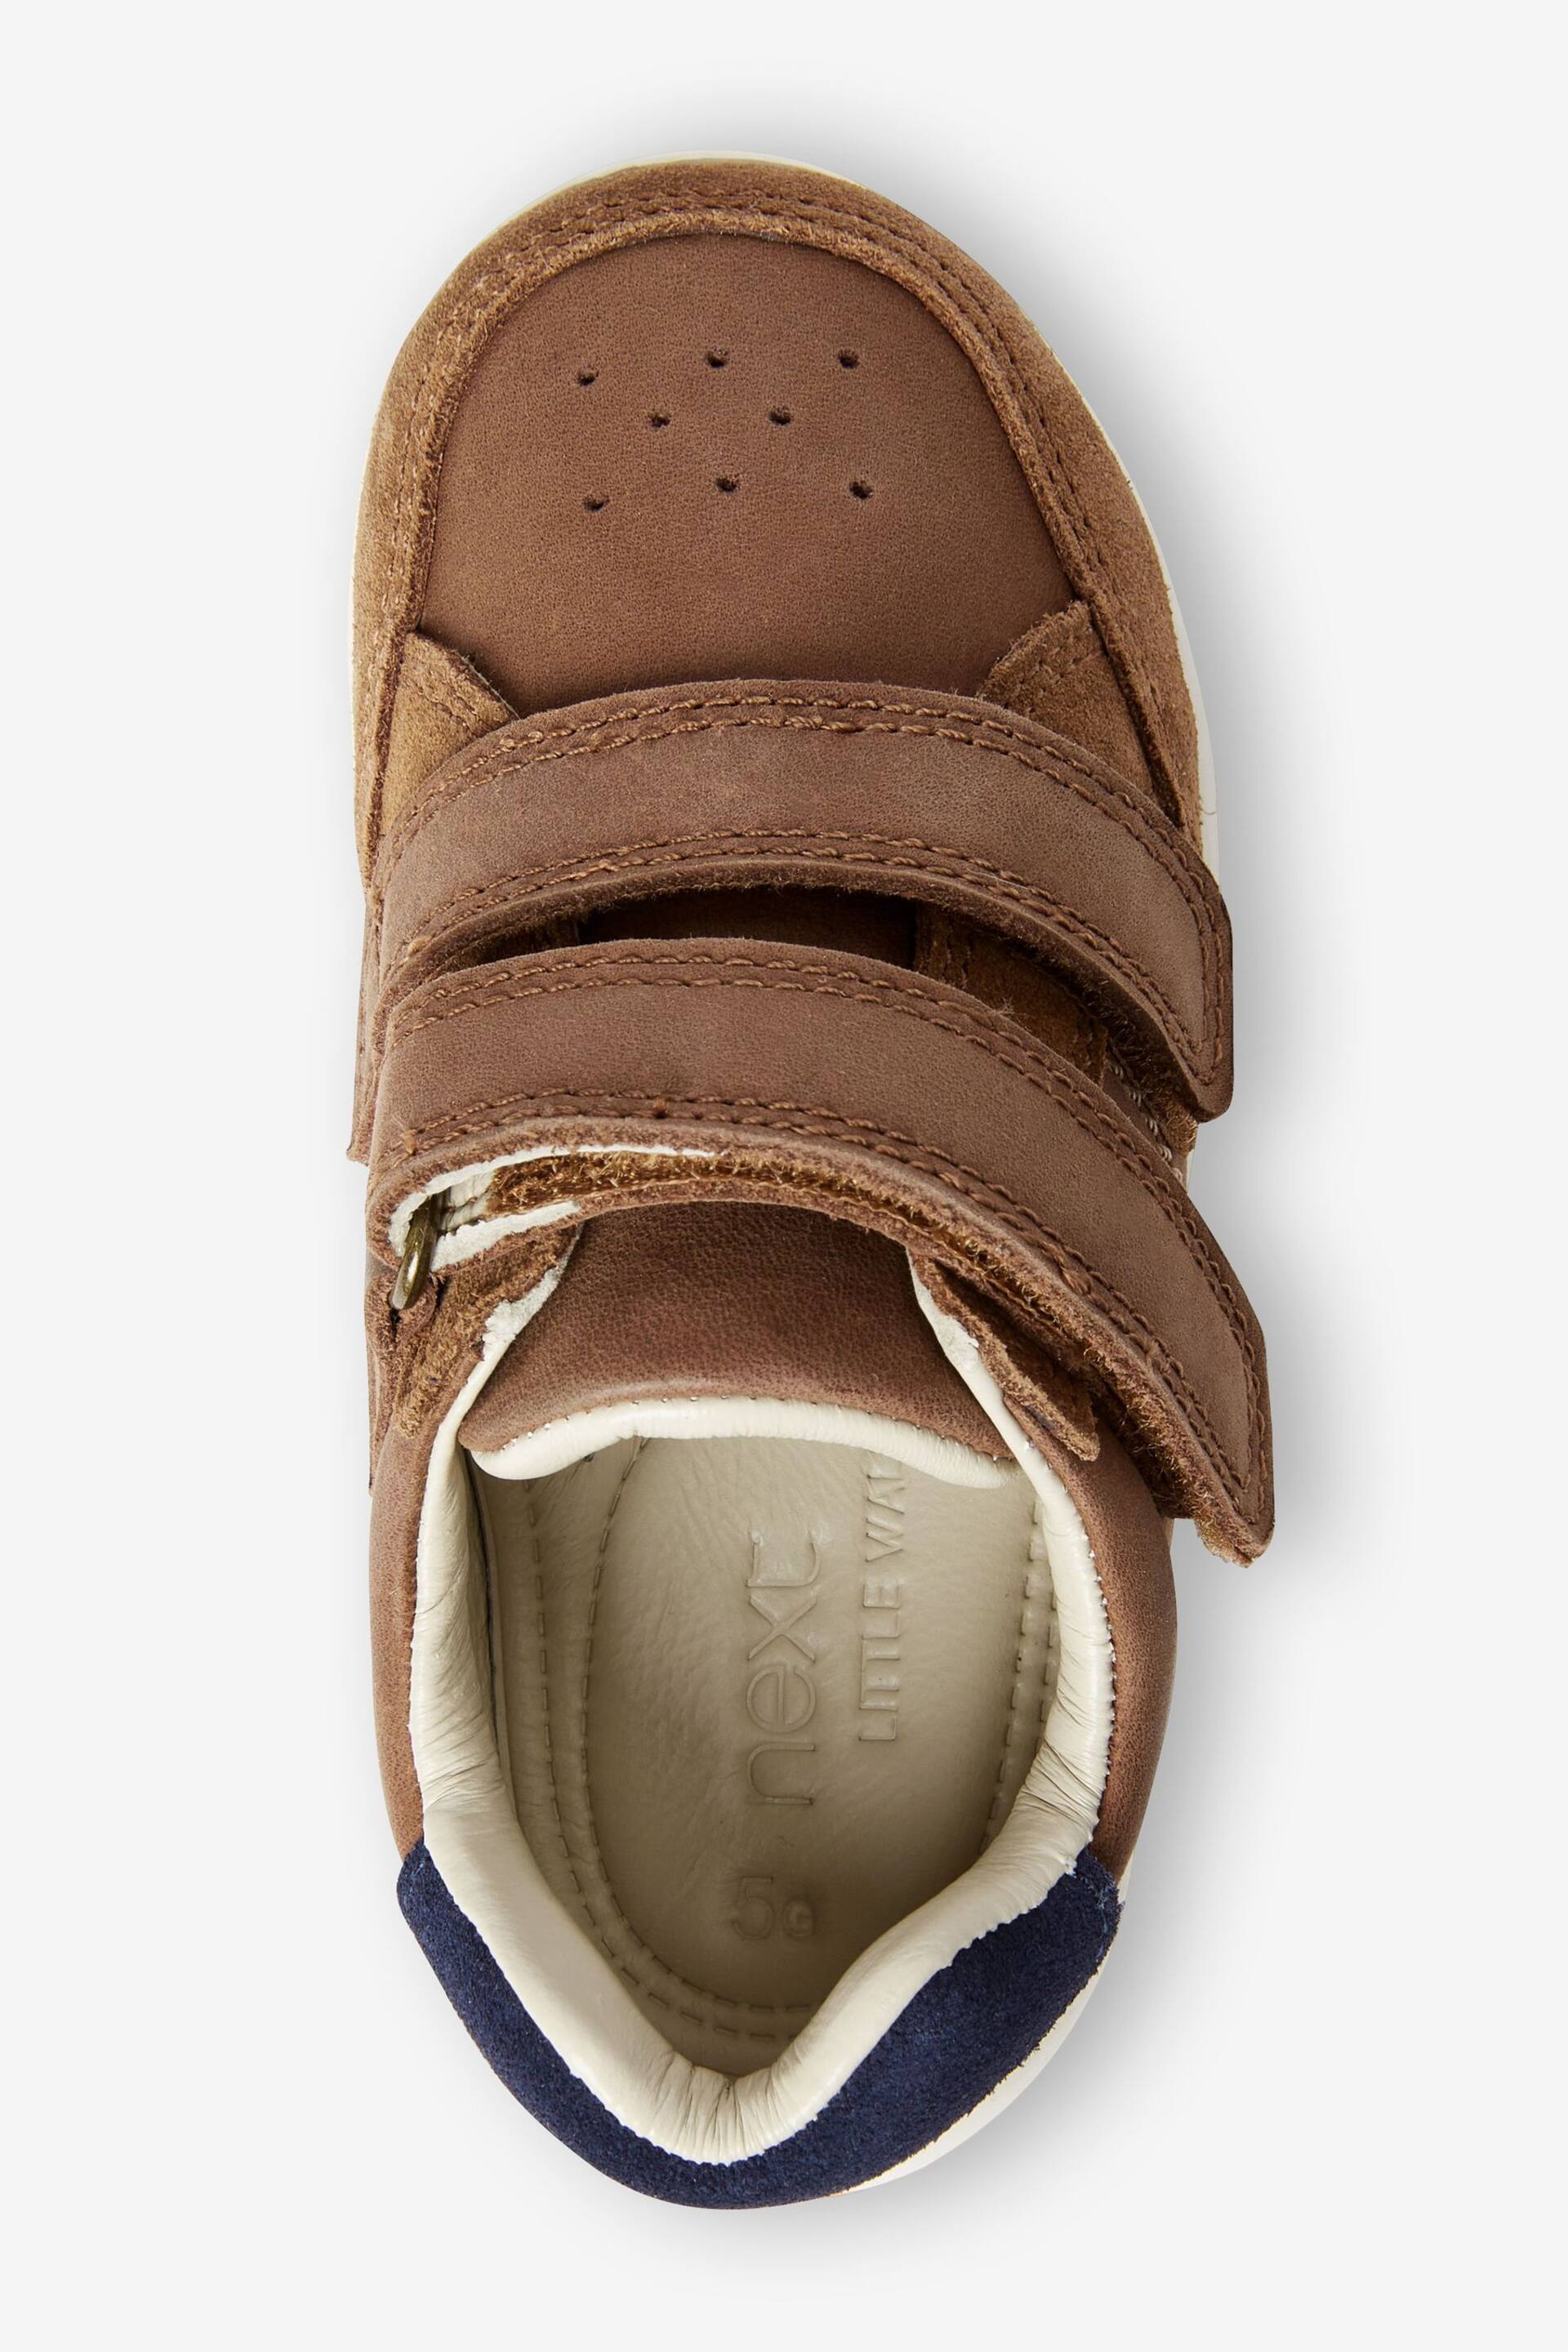 Tan Brown Wide Fit (G) Touch Fastening Leather First Walker Baby Shoes - Image 3 of 4